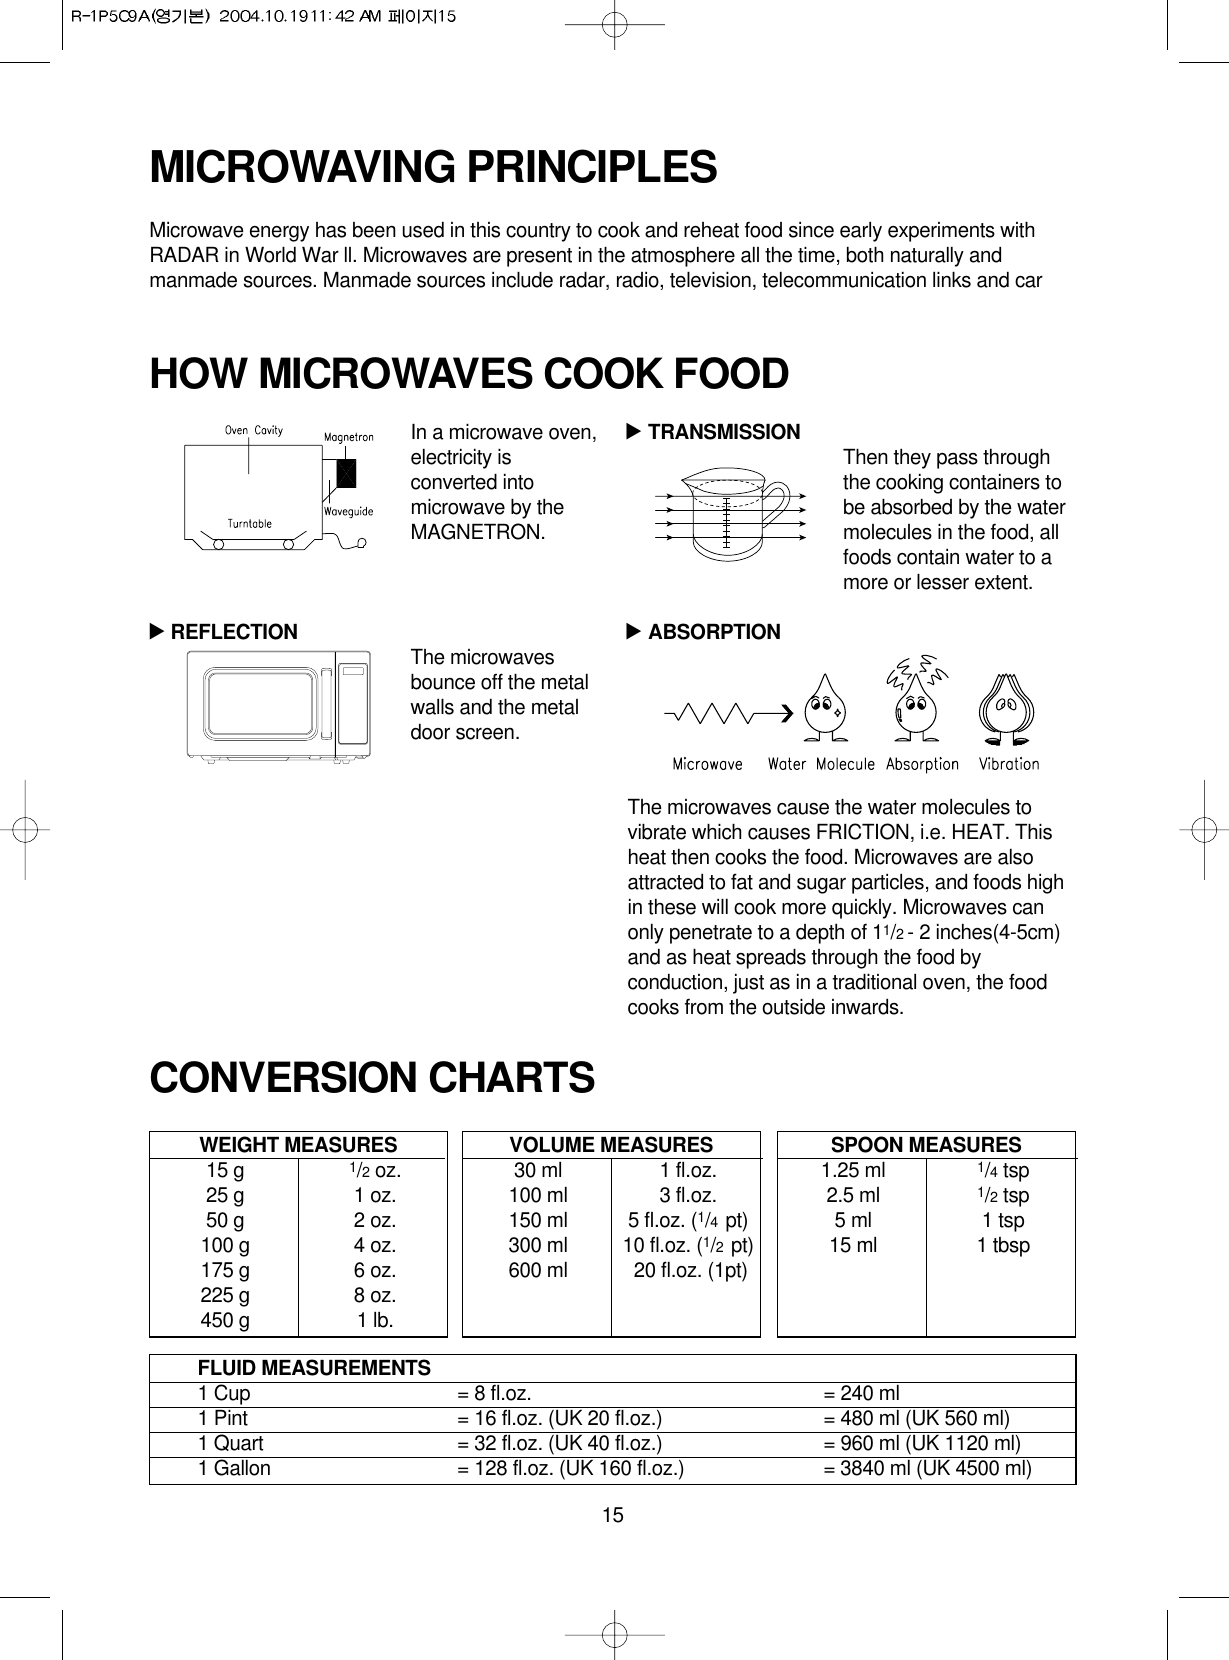 15MICROWAVING PRINCIPLESMicrowave energy has been used in this country to cook and reheat food since early experiments withRADAR in World War ll. Microwaves are present in the atmosphere all the time, both naturally andmanmade sources. Manmade sources include radar, radio, television, telecommunication links and carCONVERSION CHARTSIn a microwave oven,electricity isconverted intomicrowave by theMAGNETRON.REFLECTION The microwavesbounce off the metalwalls and the metaldoor screen.TRANSMISSION Then they pass throughthe cooking containers tobe absorbed by the watermolecules in the food, allfoods contain water to amore or lesser extent.ABSORPTIONThe microwaves cause the water molecules tovibrate which causes FRICTION, i.e. HEAT. Thisheat then cooks the food. Microwaves are alsoattracted to fat and sugar particles, and foods highin these will cook more quickly. Microwaves canonly penetrate to a depth of 11/2 - 2 inches(4-5cm)and as heat spreads through the food byconduction, just as in a traditional oven, the foodcooks from the outside inwards.WEIGHT MEASURES15 g 1/2oz.25 g 1 oz.50 g 2 oz.100 g 4 oz.175 g 6 oz.225 g 8 oz.450 g 1 lb.HOW MICROWAVES COOK FOOD▲▲▲VOLUME MEASURES30 ml 1 fl.oz.100 ml 3 fl.oz.150 ml 5 fl.oz. (1/4  pt)300 ml 10 fl.oz. (1/2  pt)600 ml 20 fl.oz. (1pt)SPOON MEASURES1.25 ml 1/4tsp2.5 ml 1/2tsp5 ml 1 tsp15 ml 1 tbspFLUID MEASUREMENTS1 Cup = 8 fl.oz. = 240 ml1 Pint = 16 fl.oz. (UK 20 fl.oz.) = 480 ml (UK 560 ml)1 Quart = 32 fl.oz. (UK 40 fl.oz.) = 960 ml (UK 1120 ml)1 Gallon = 128 fl.oz. (UK 160 fl.oz.) = 3840 ml (UK 4500 ml)